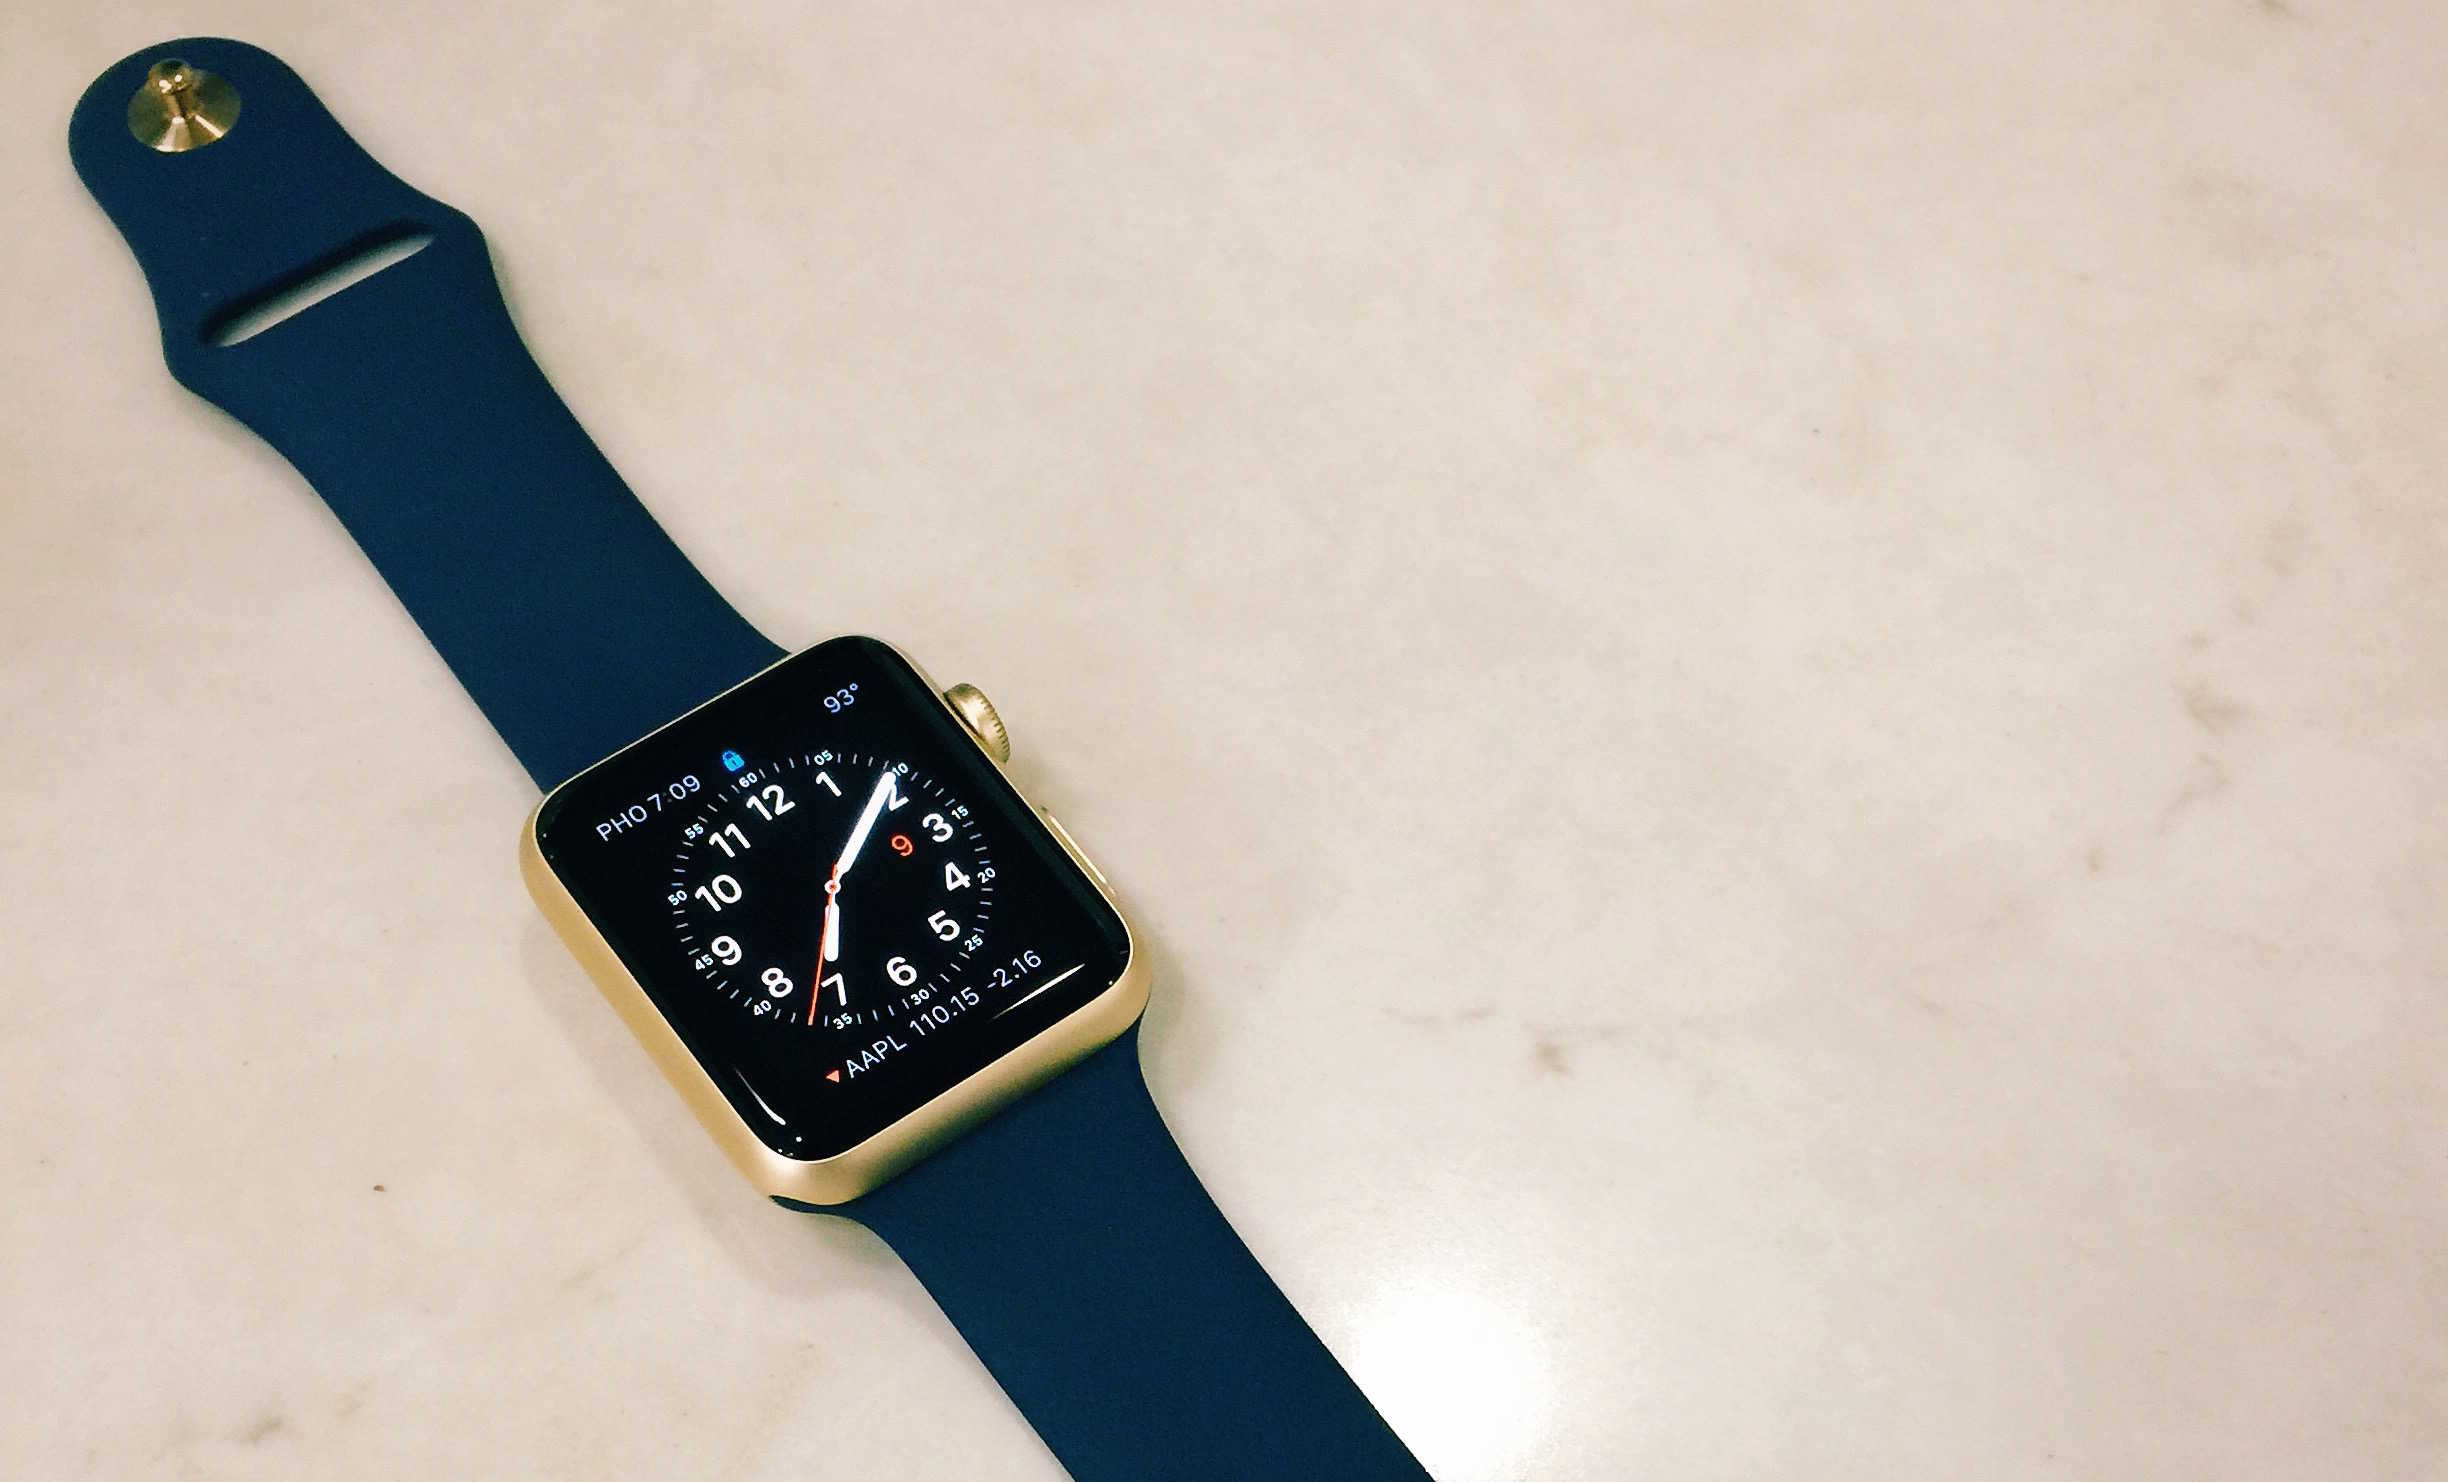 The gold Apple Watch looks great with a navy band.